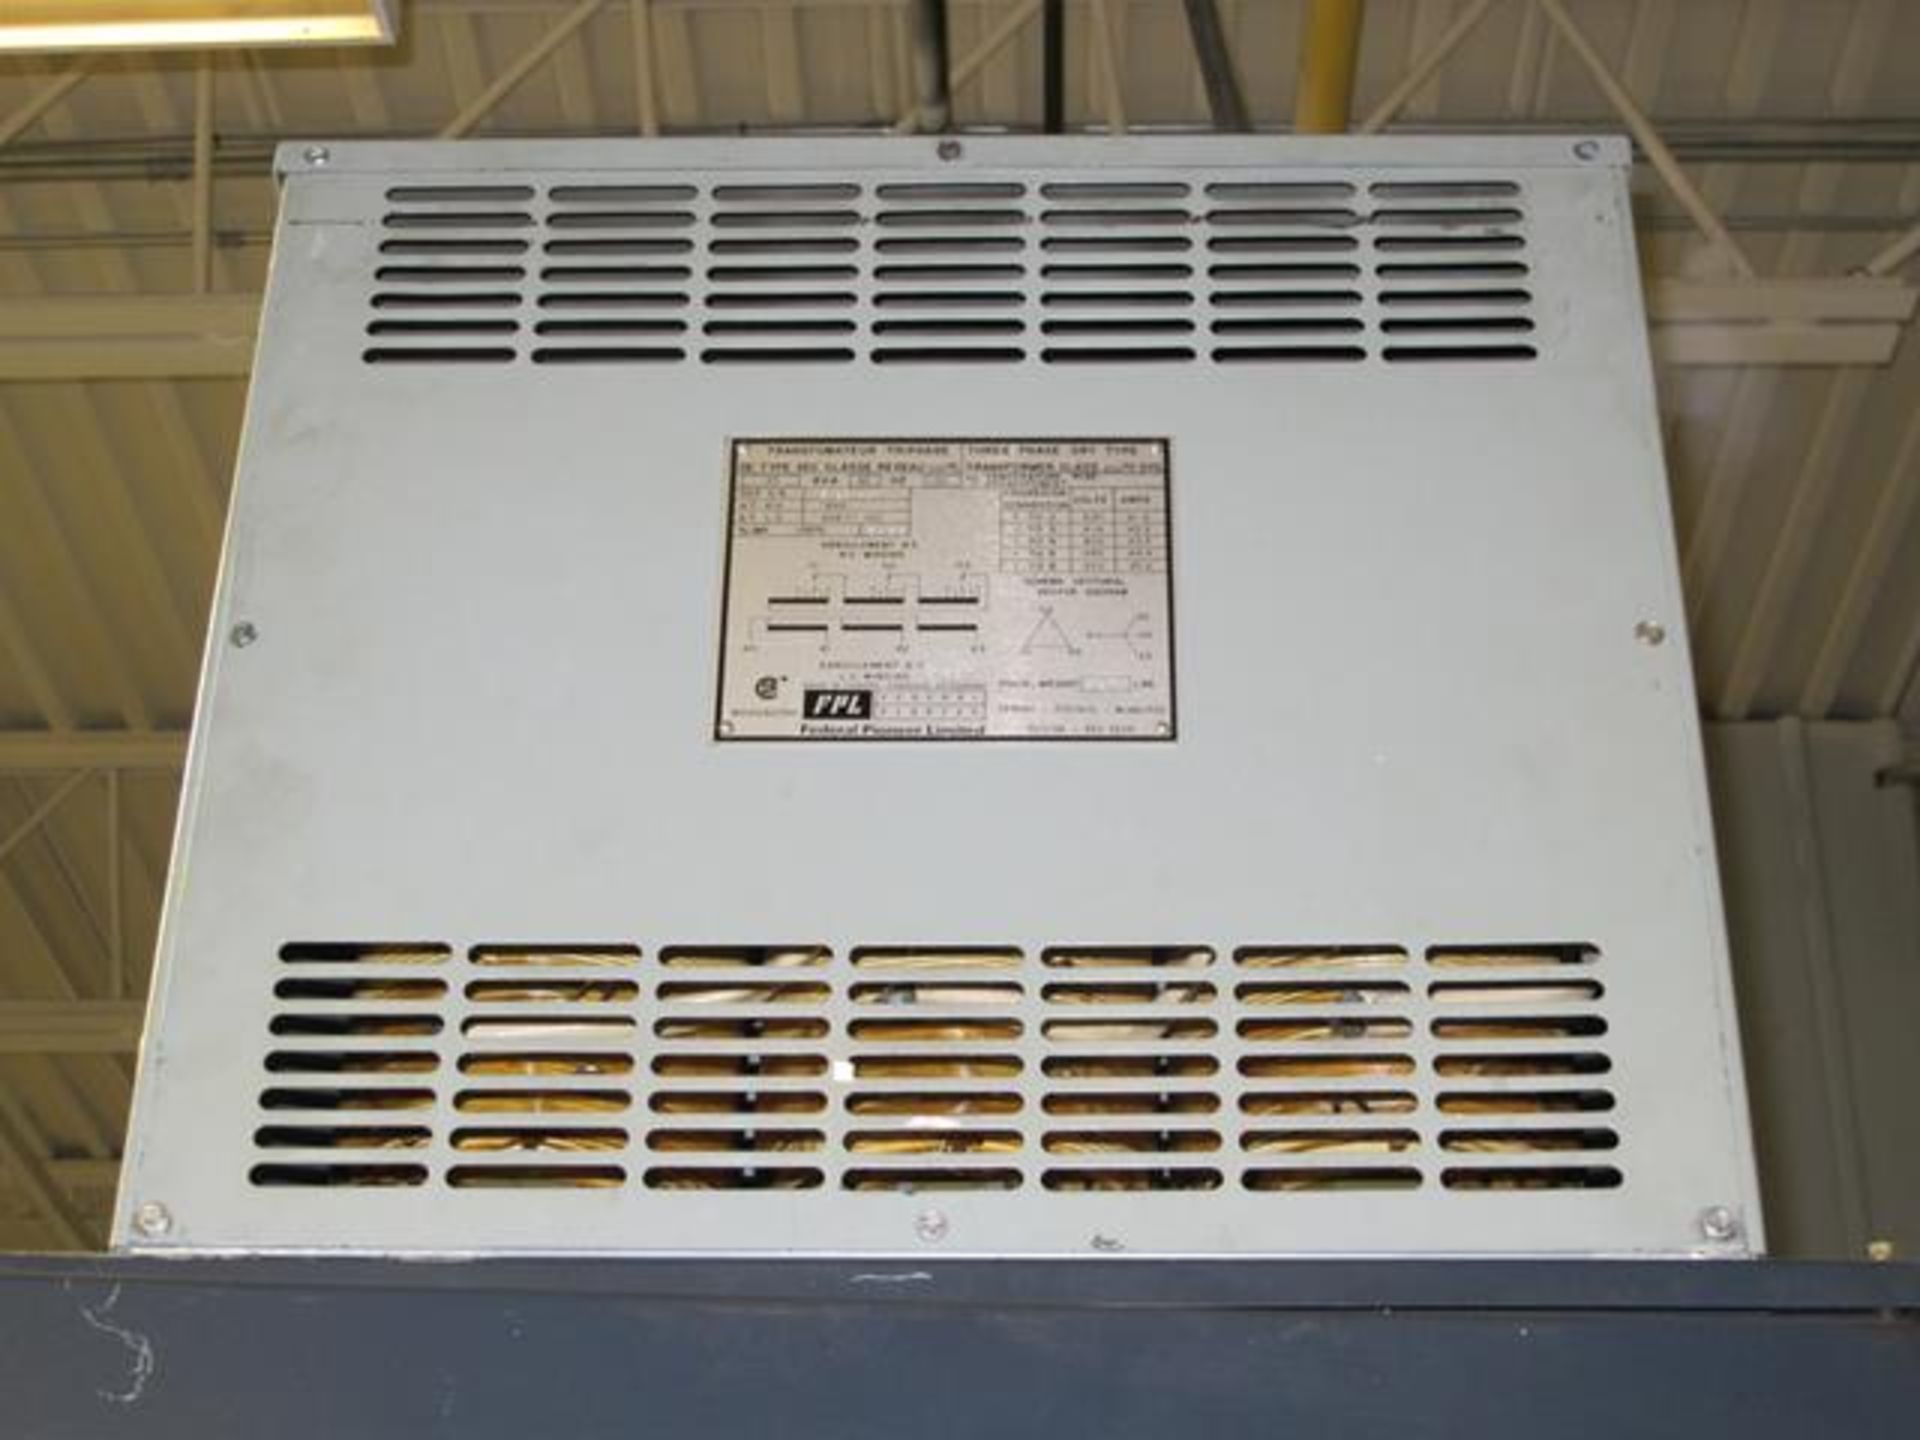 FEDERAL PIONEER TRANSFORMER, 600V TO 220V, 45 KVA, USED WITH LOT 26, (L2)